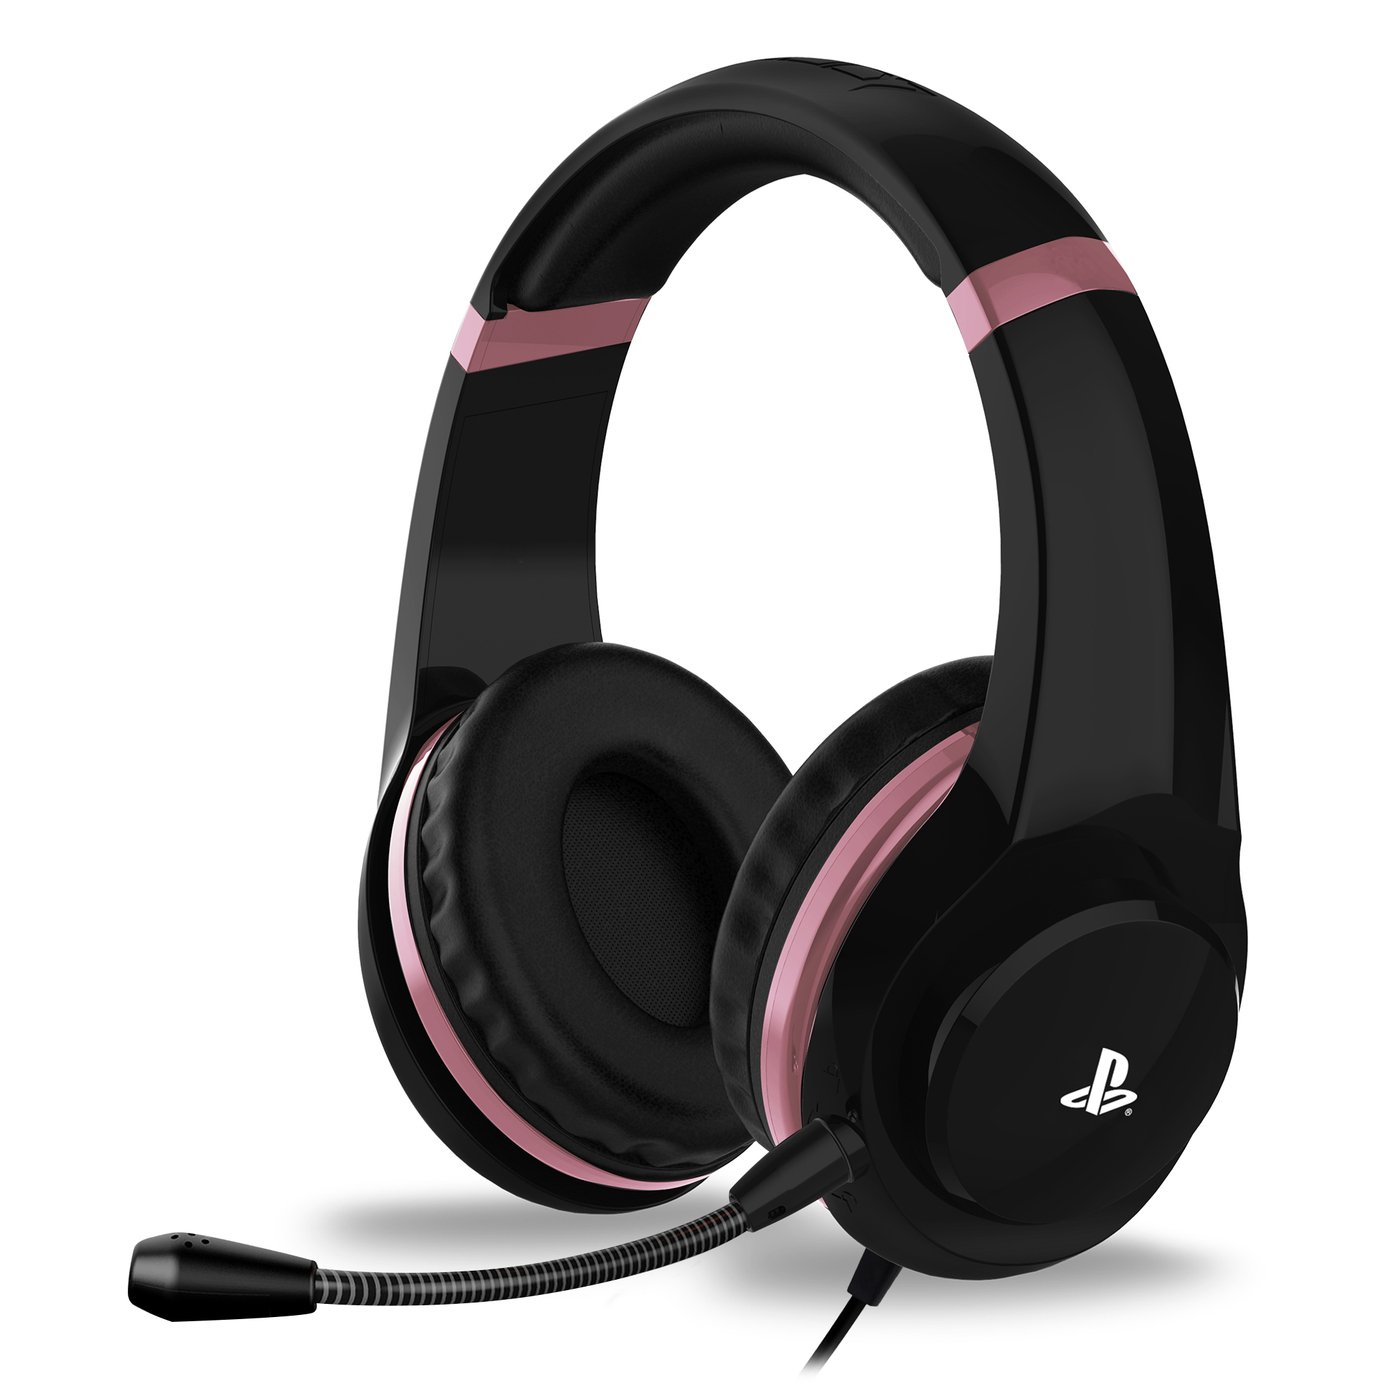 4Gamers Officially Licensed PS4 Headset - Rose Gold & Black